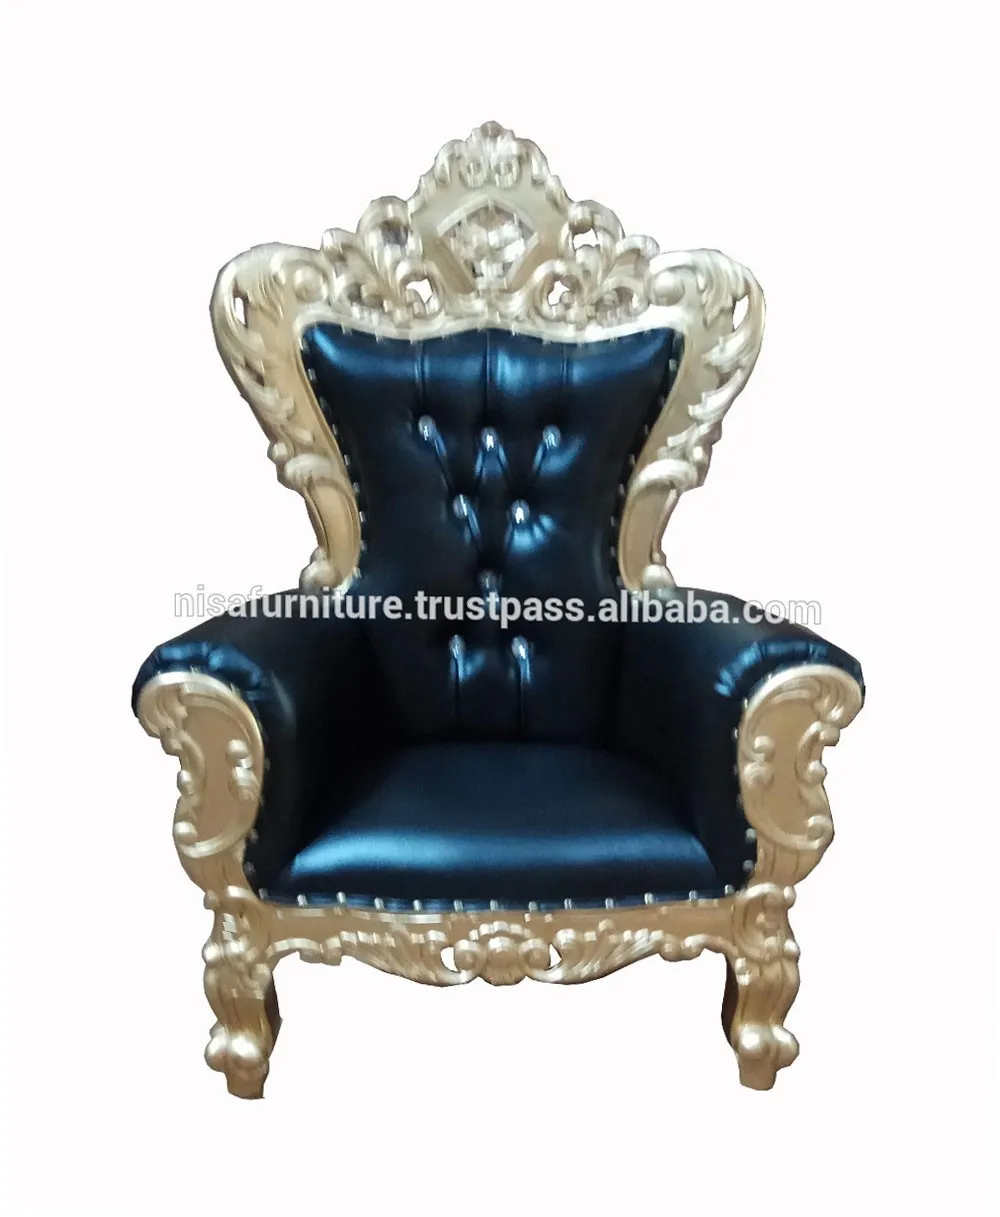 Baby Kids Gold Black King Throne Chair Indonesia Furniture Buy